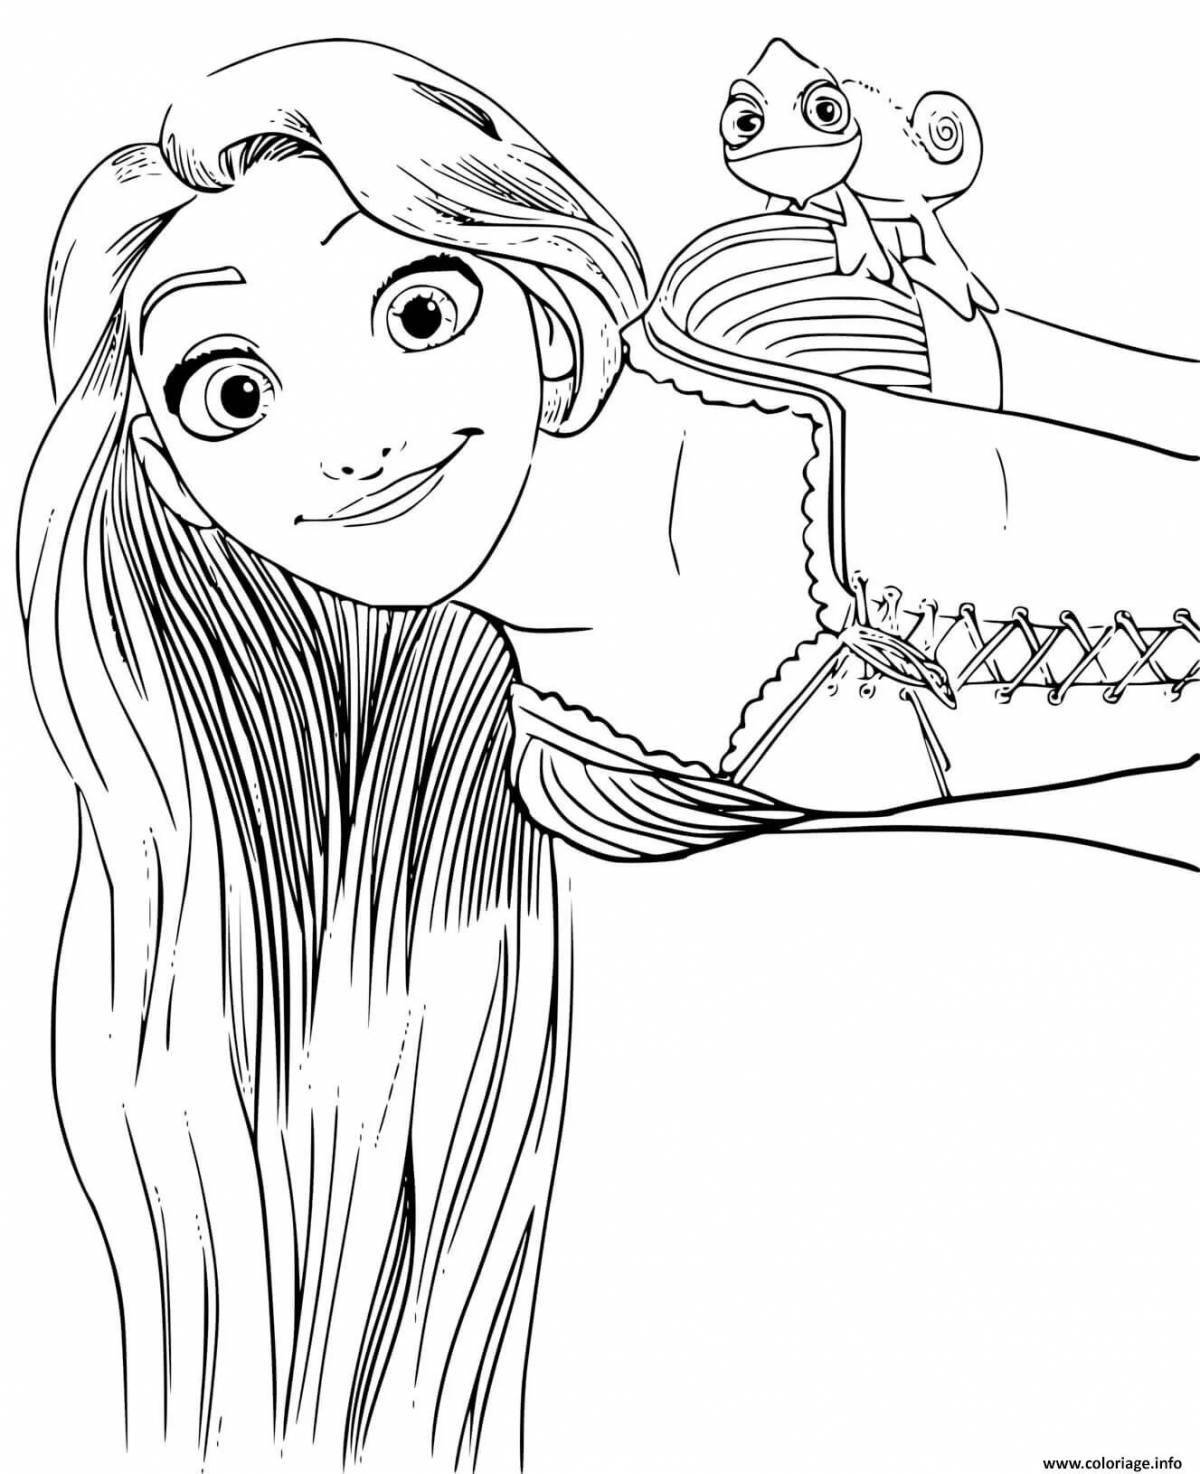 Rapunzel radiant coloring book for children 5-6 years old